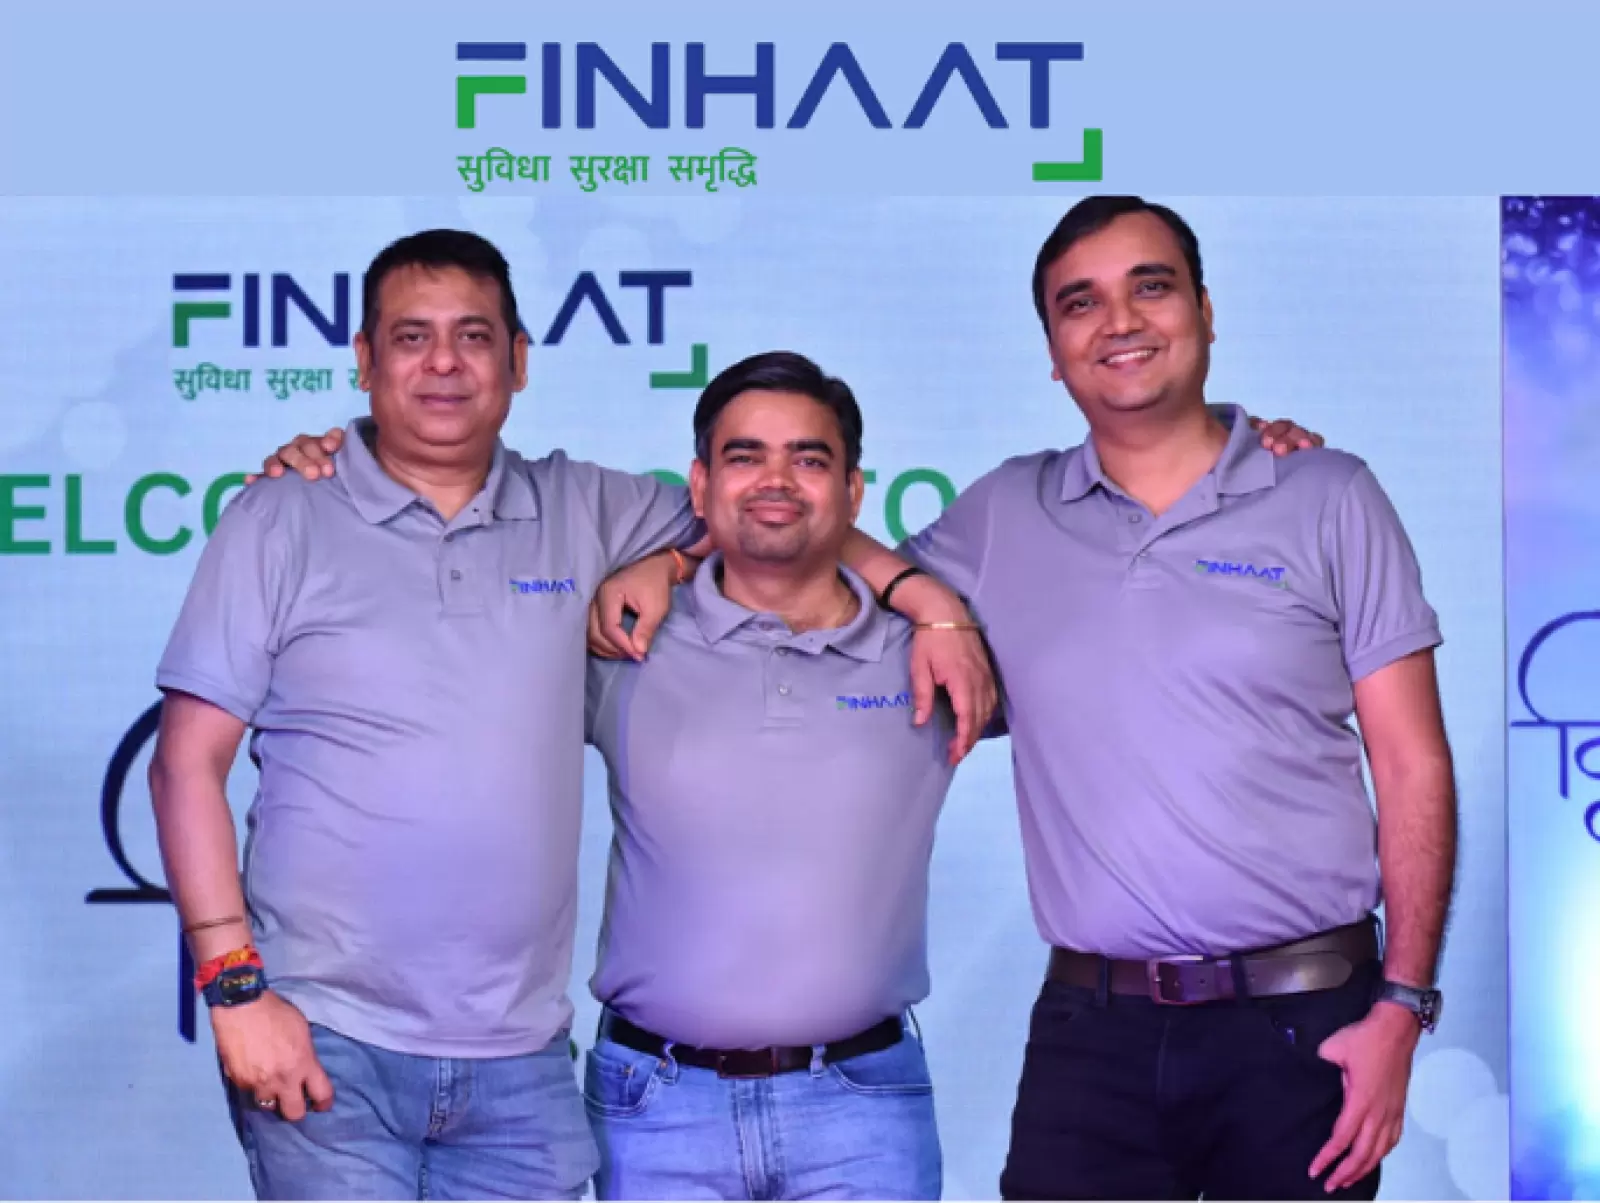 Finhaat Partners with Nidhi Companies to Empower Rural Maharashtra